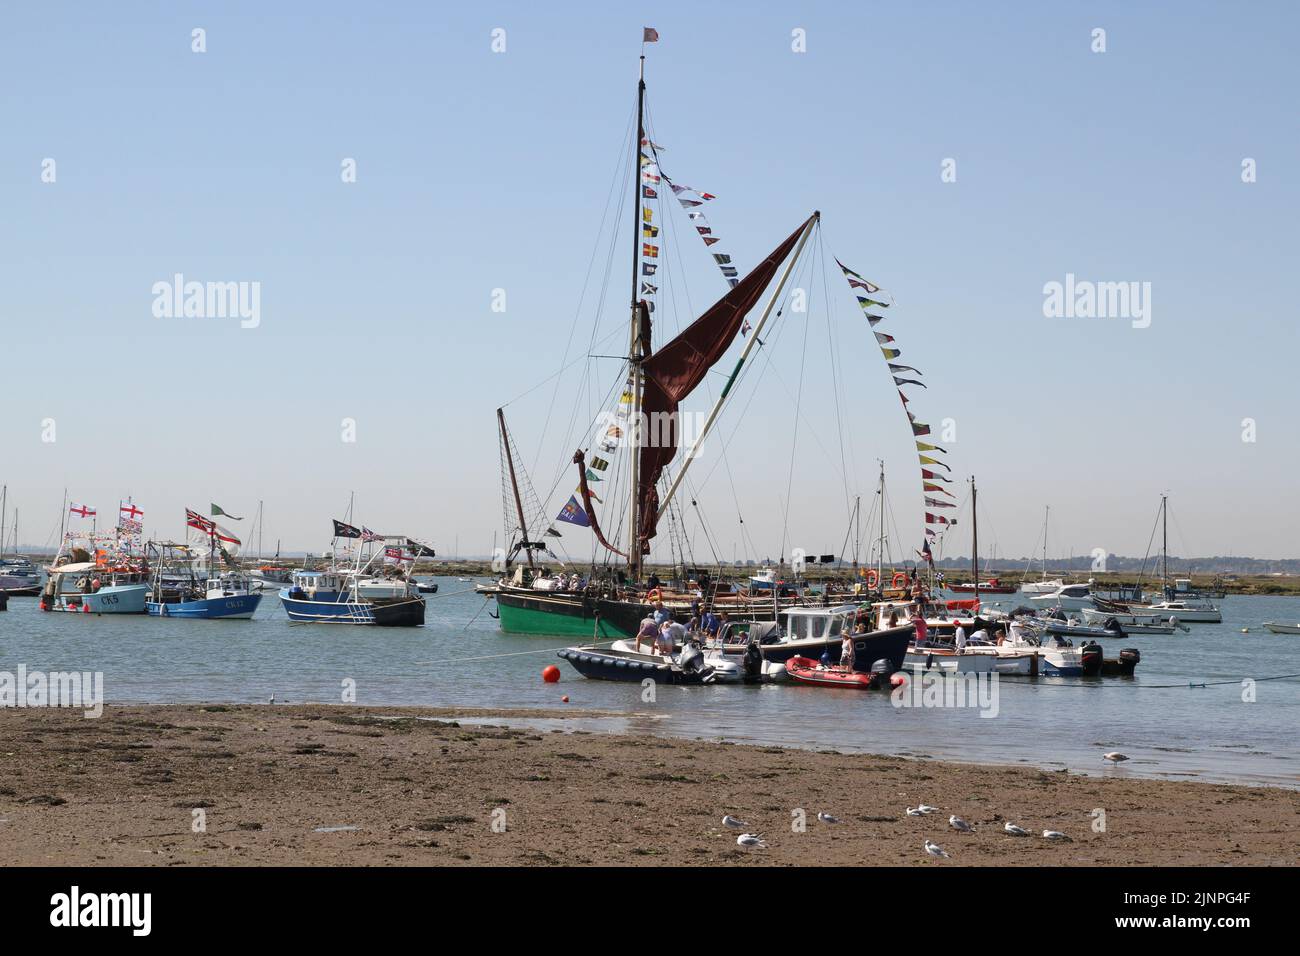 West Mersea Regatta is taking place on Mersea Island. The regatta has been run almost continually since 1838 and is organised by volunteers. Boats moored in the estuary with the Thames Barge 'Kitty'. Stock Photo